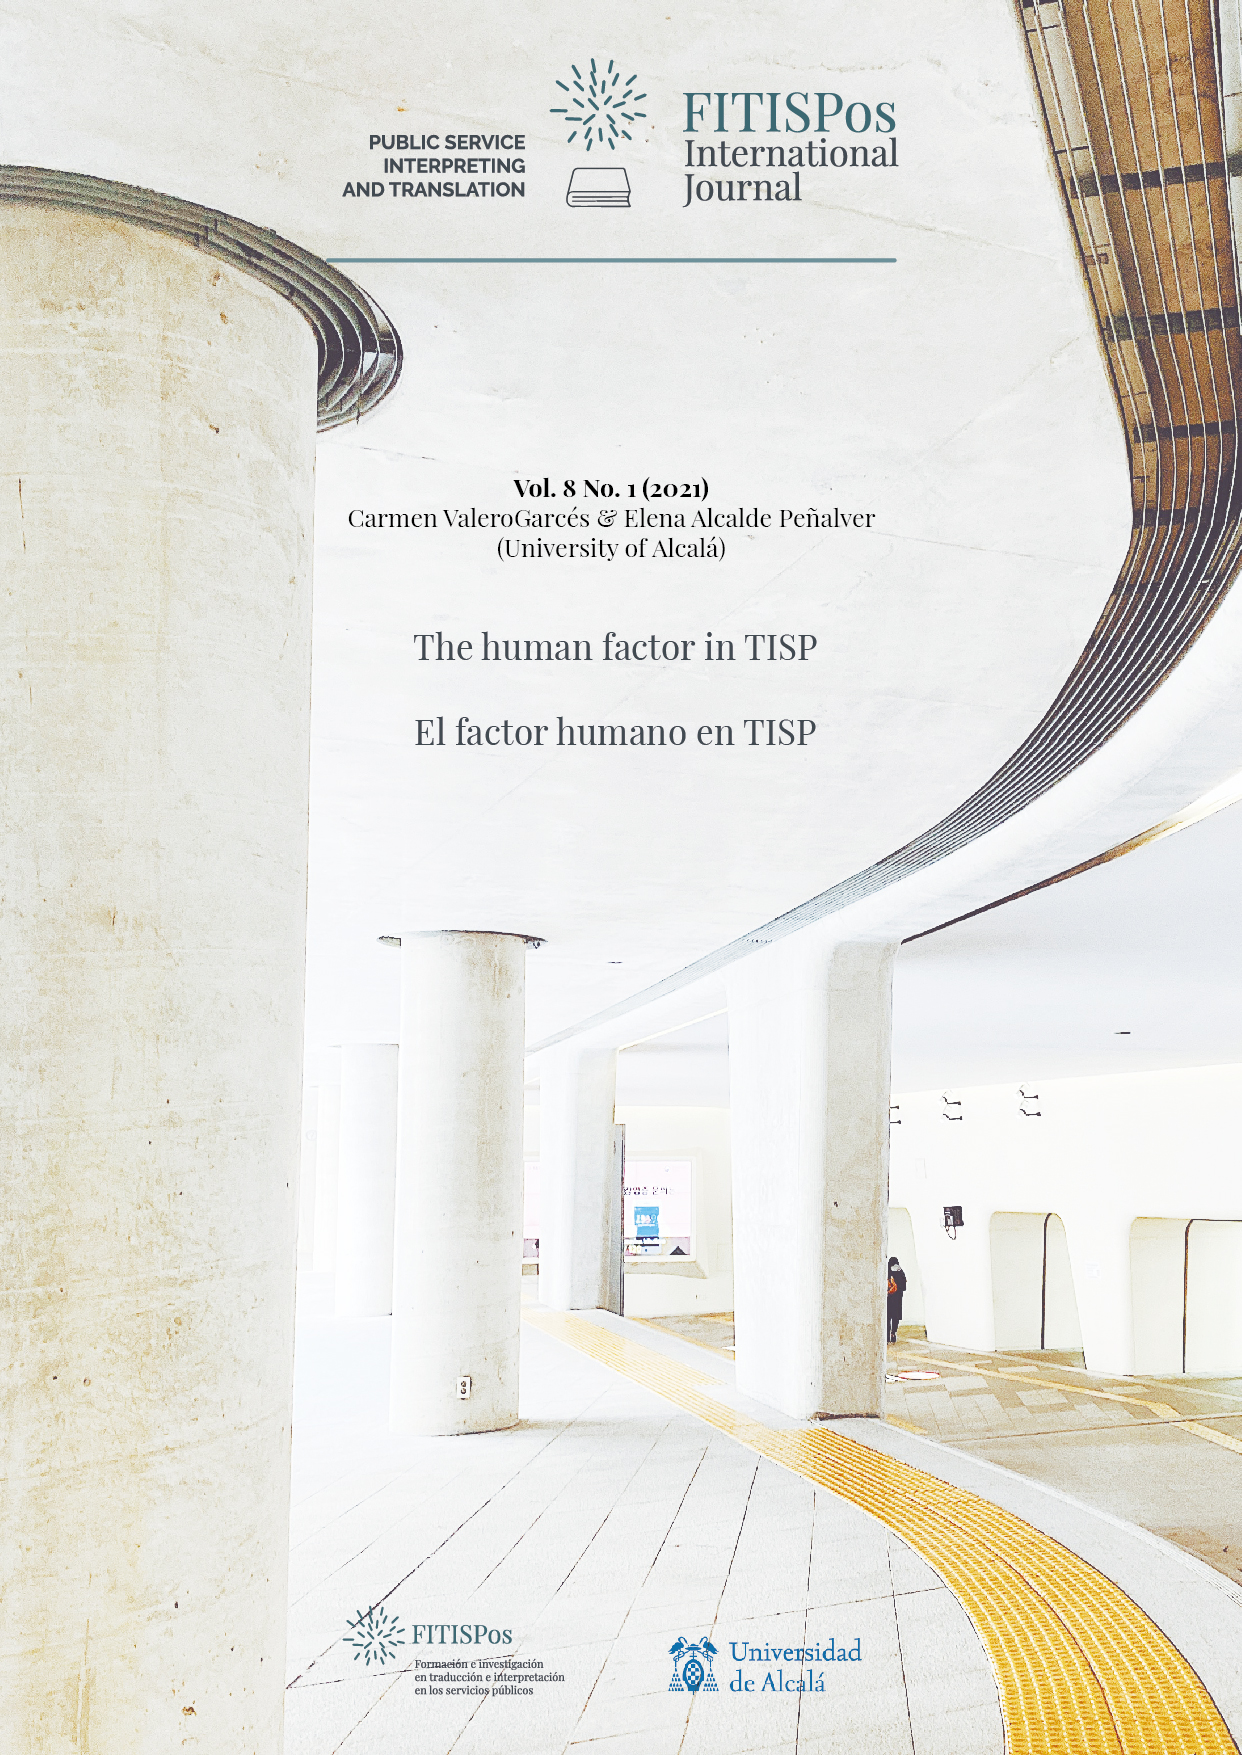 					View Vol. 8 No. 1 (2021): The Human Factor in PSIT
				